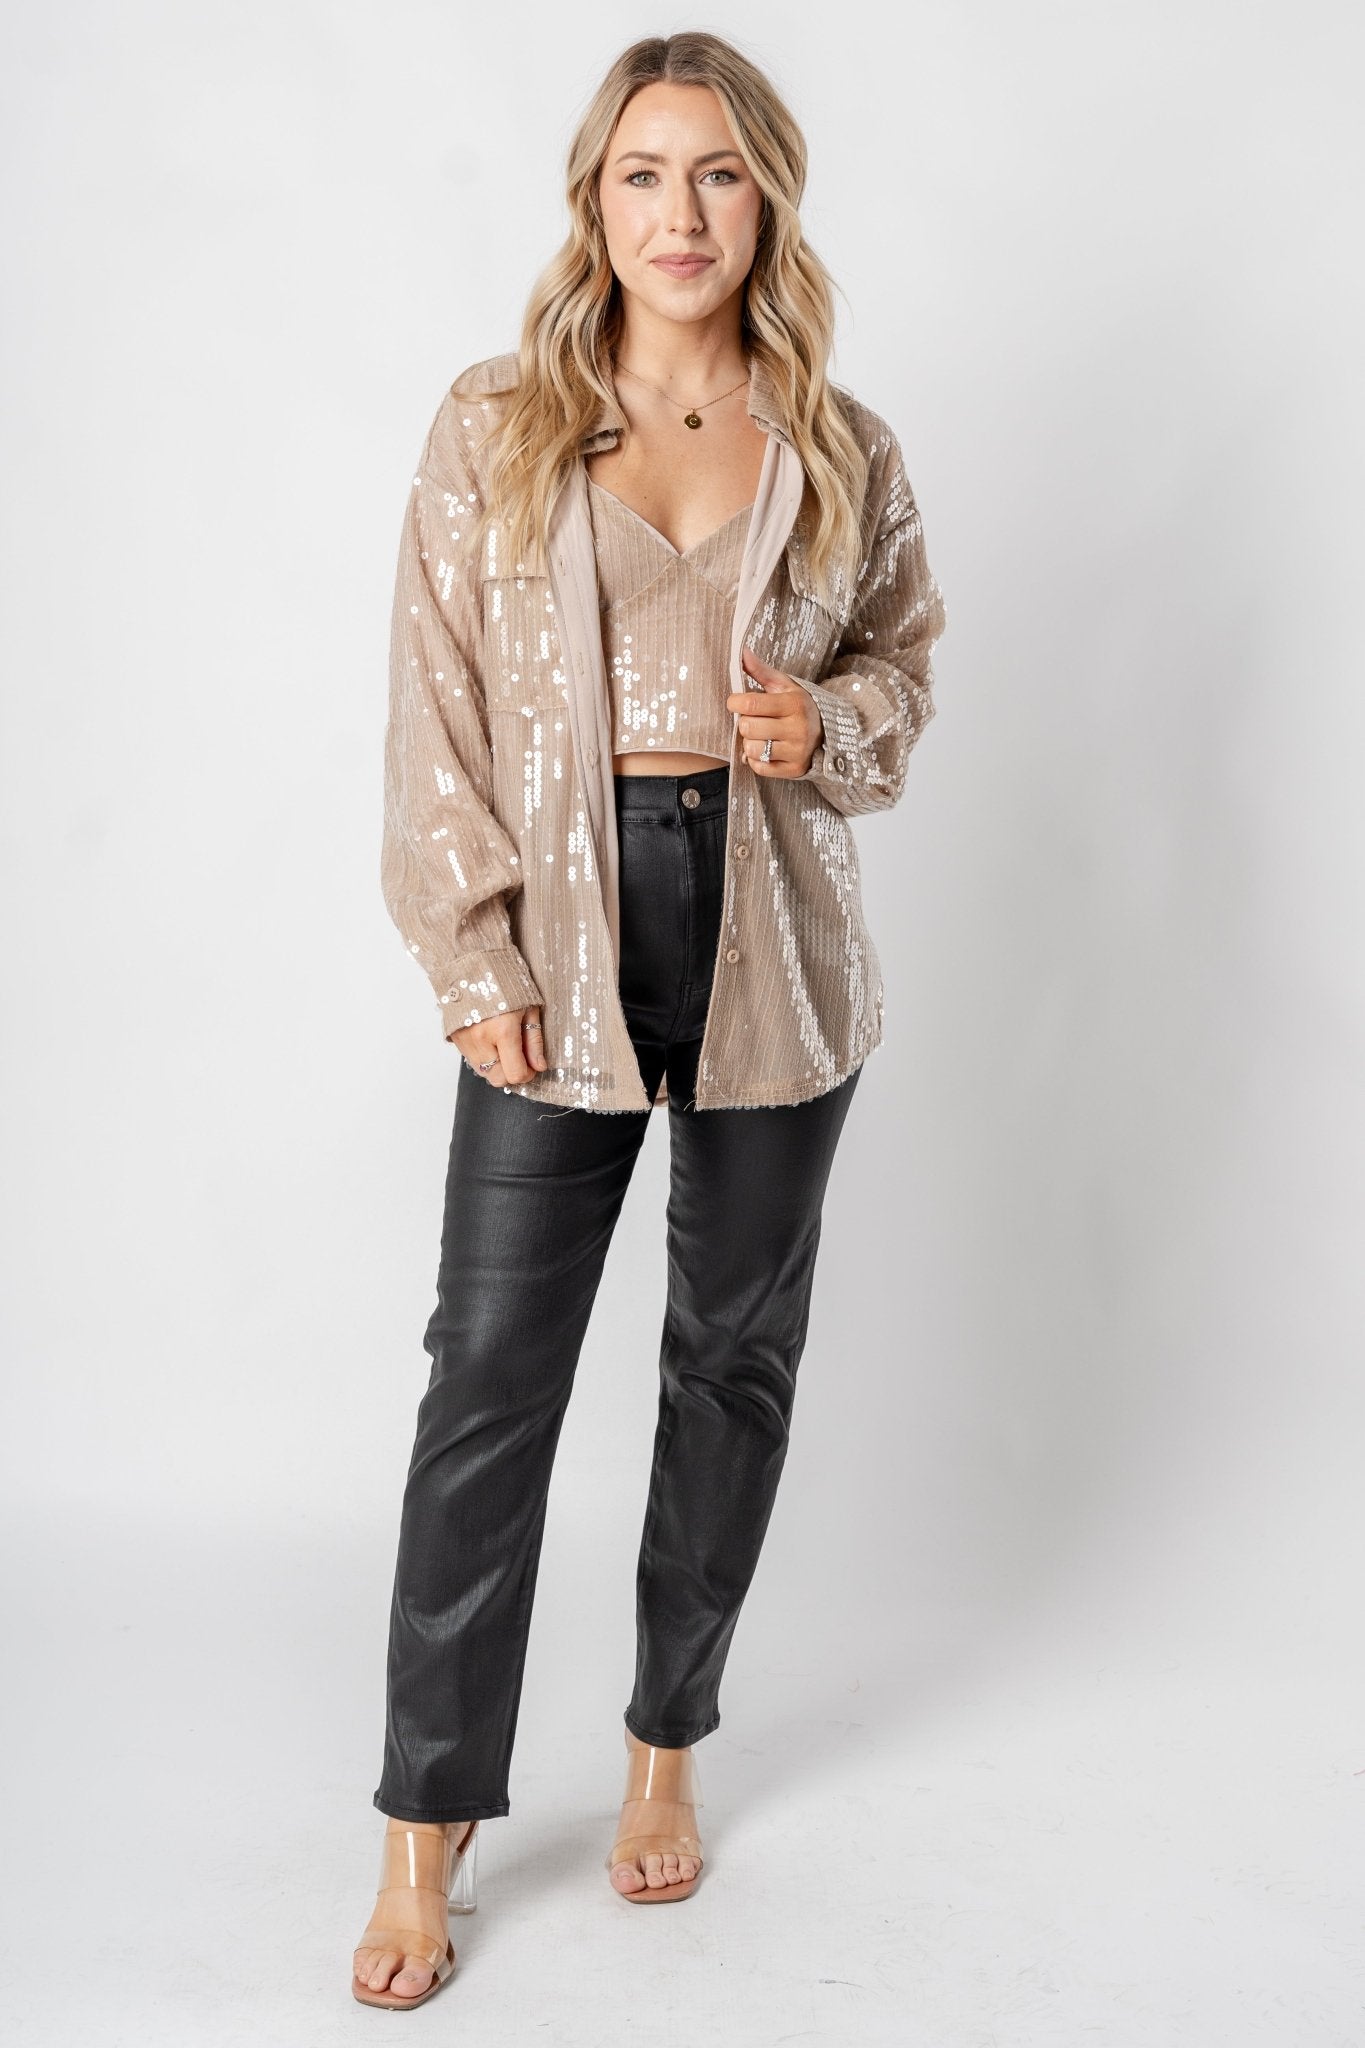 Sequin long sleeve button up top taupe - Affordable New Year's Eve Party Outfits at Lush Fashion Lounge Boutique in Oklahoma City